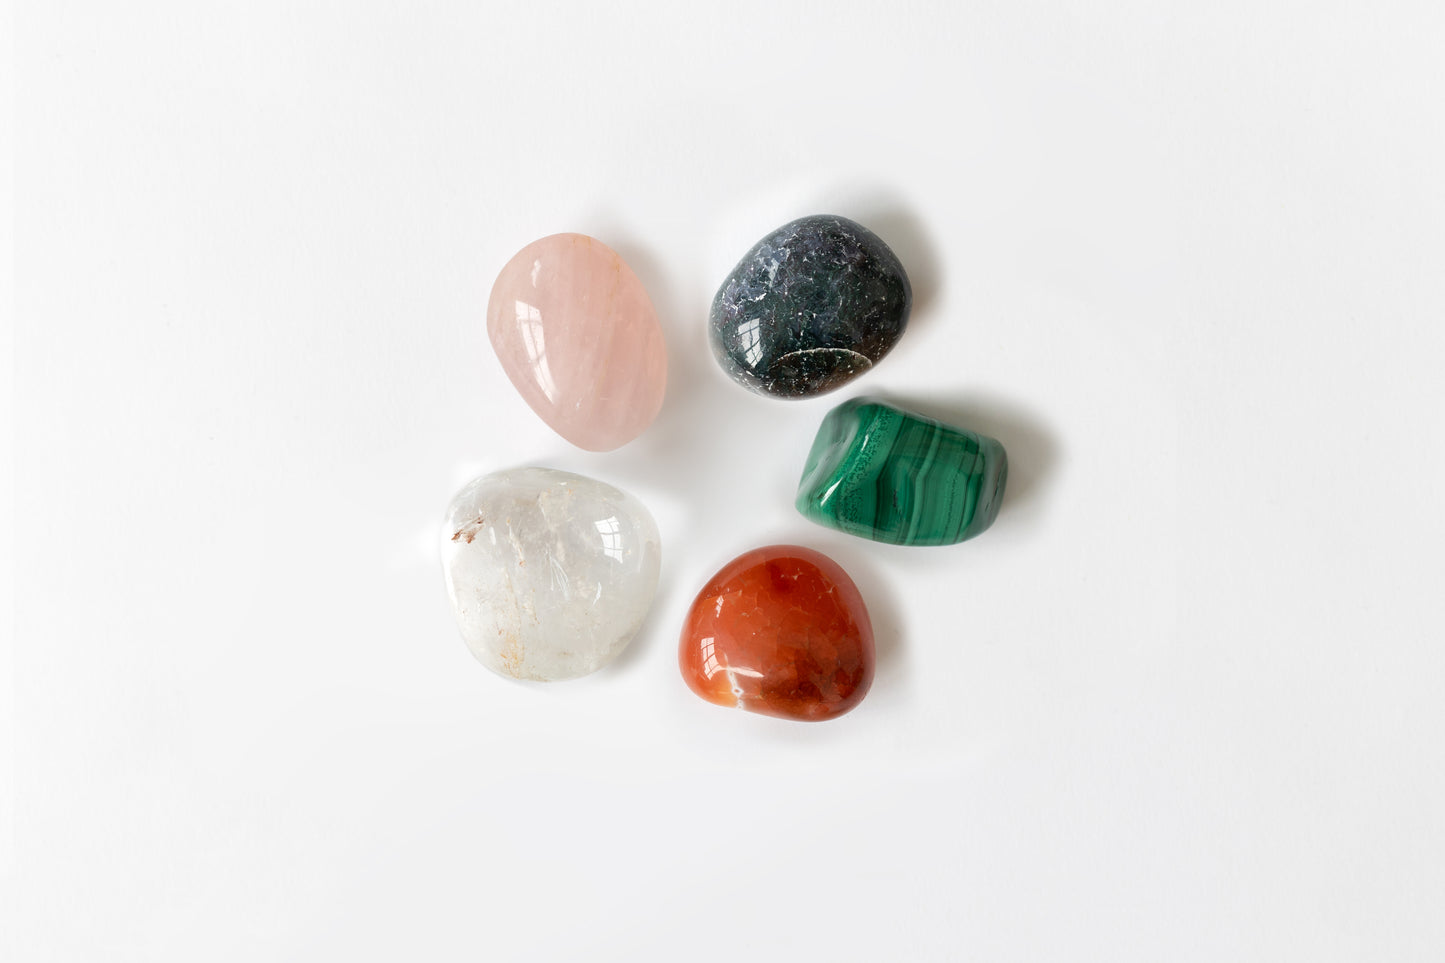 "Cosmic Family", a unique set of 5 crystals